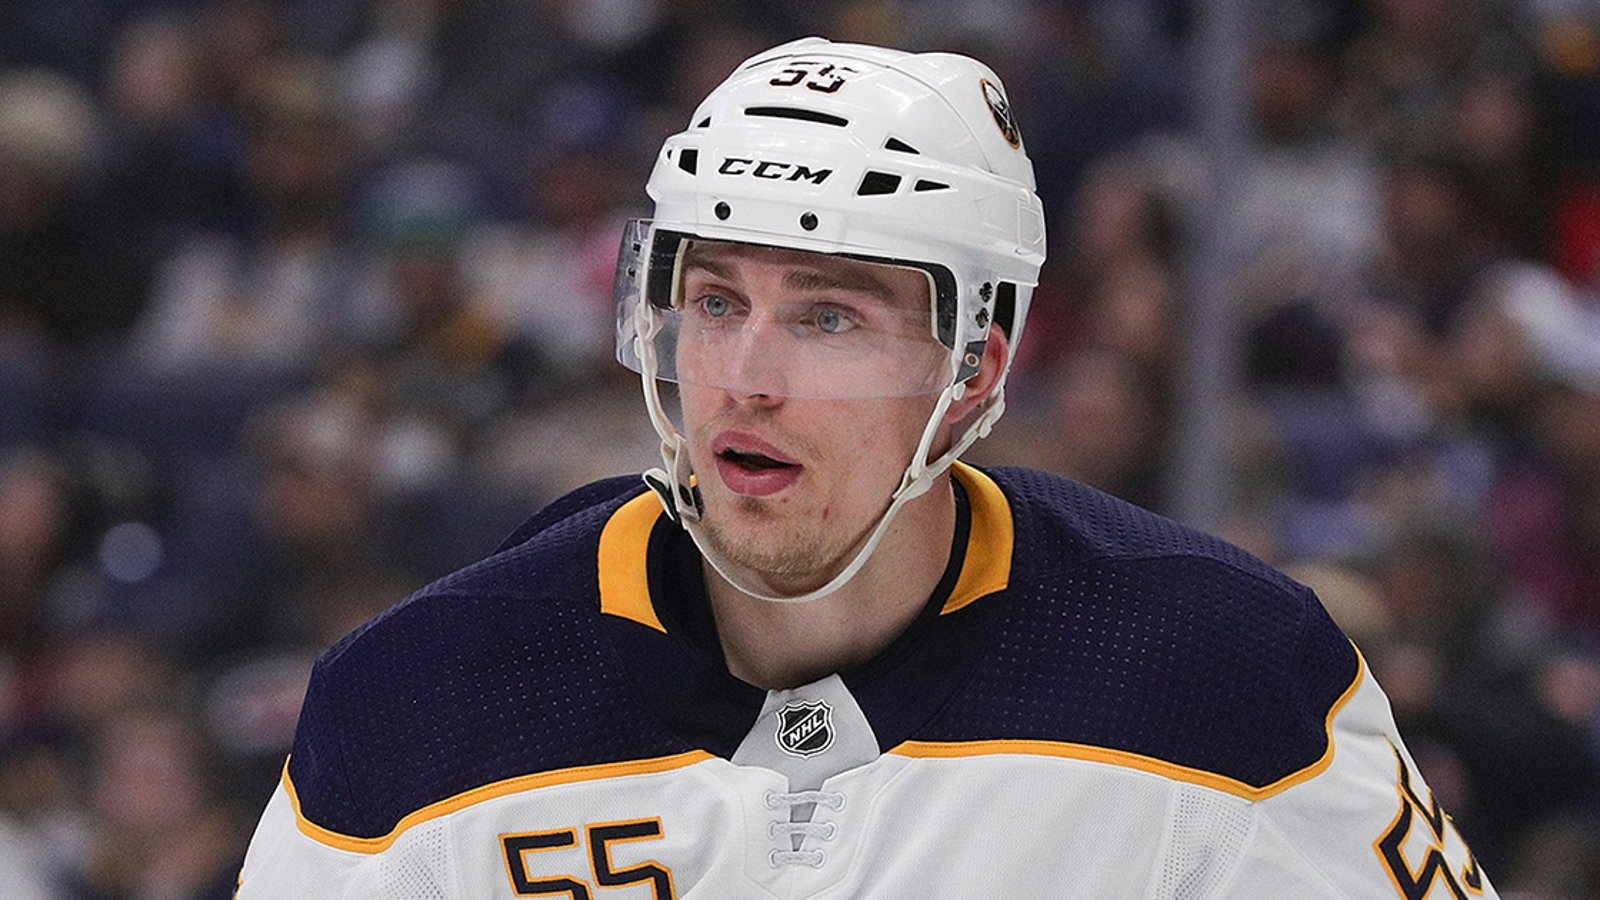 Ristolainen gets busted speeding, faces INSANE fine!